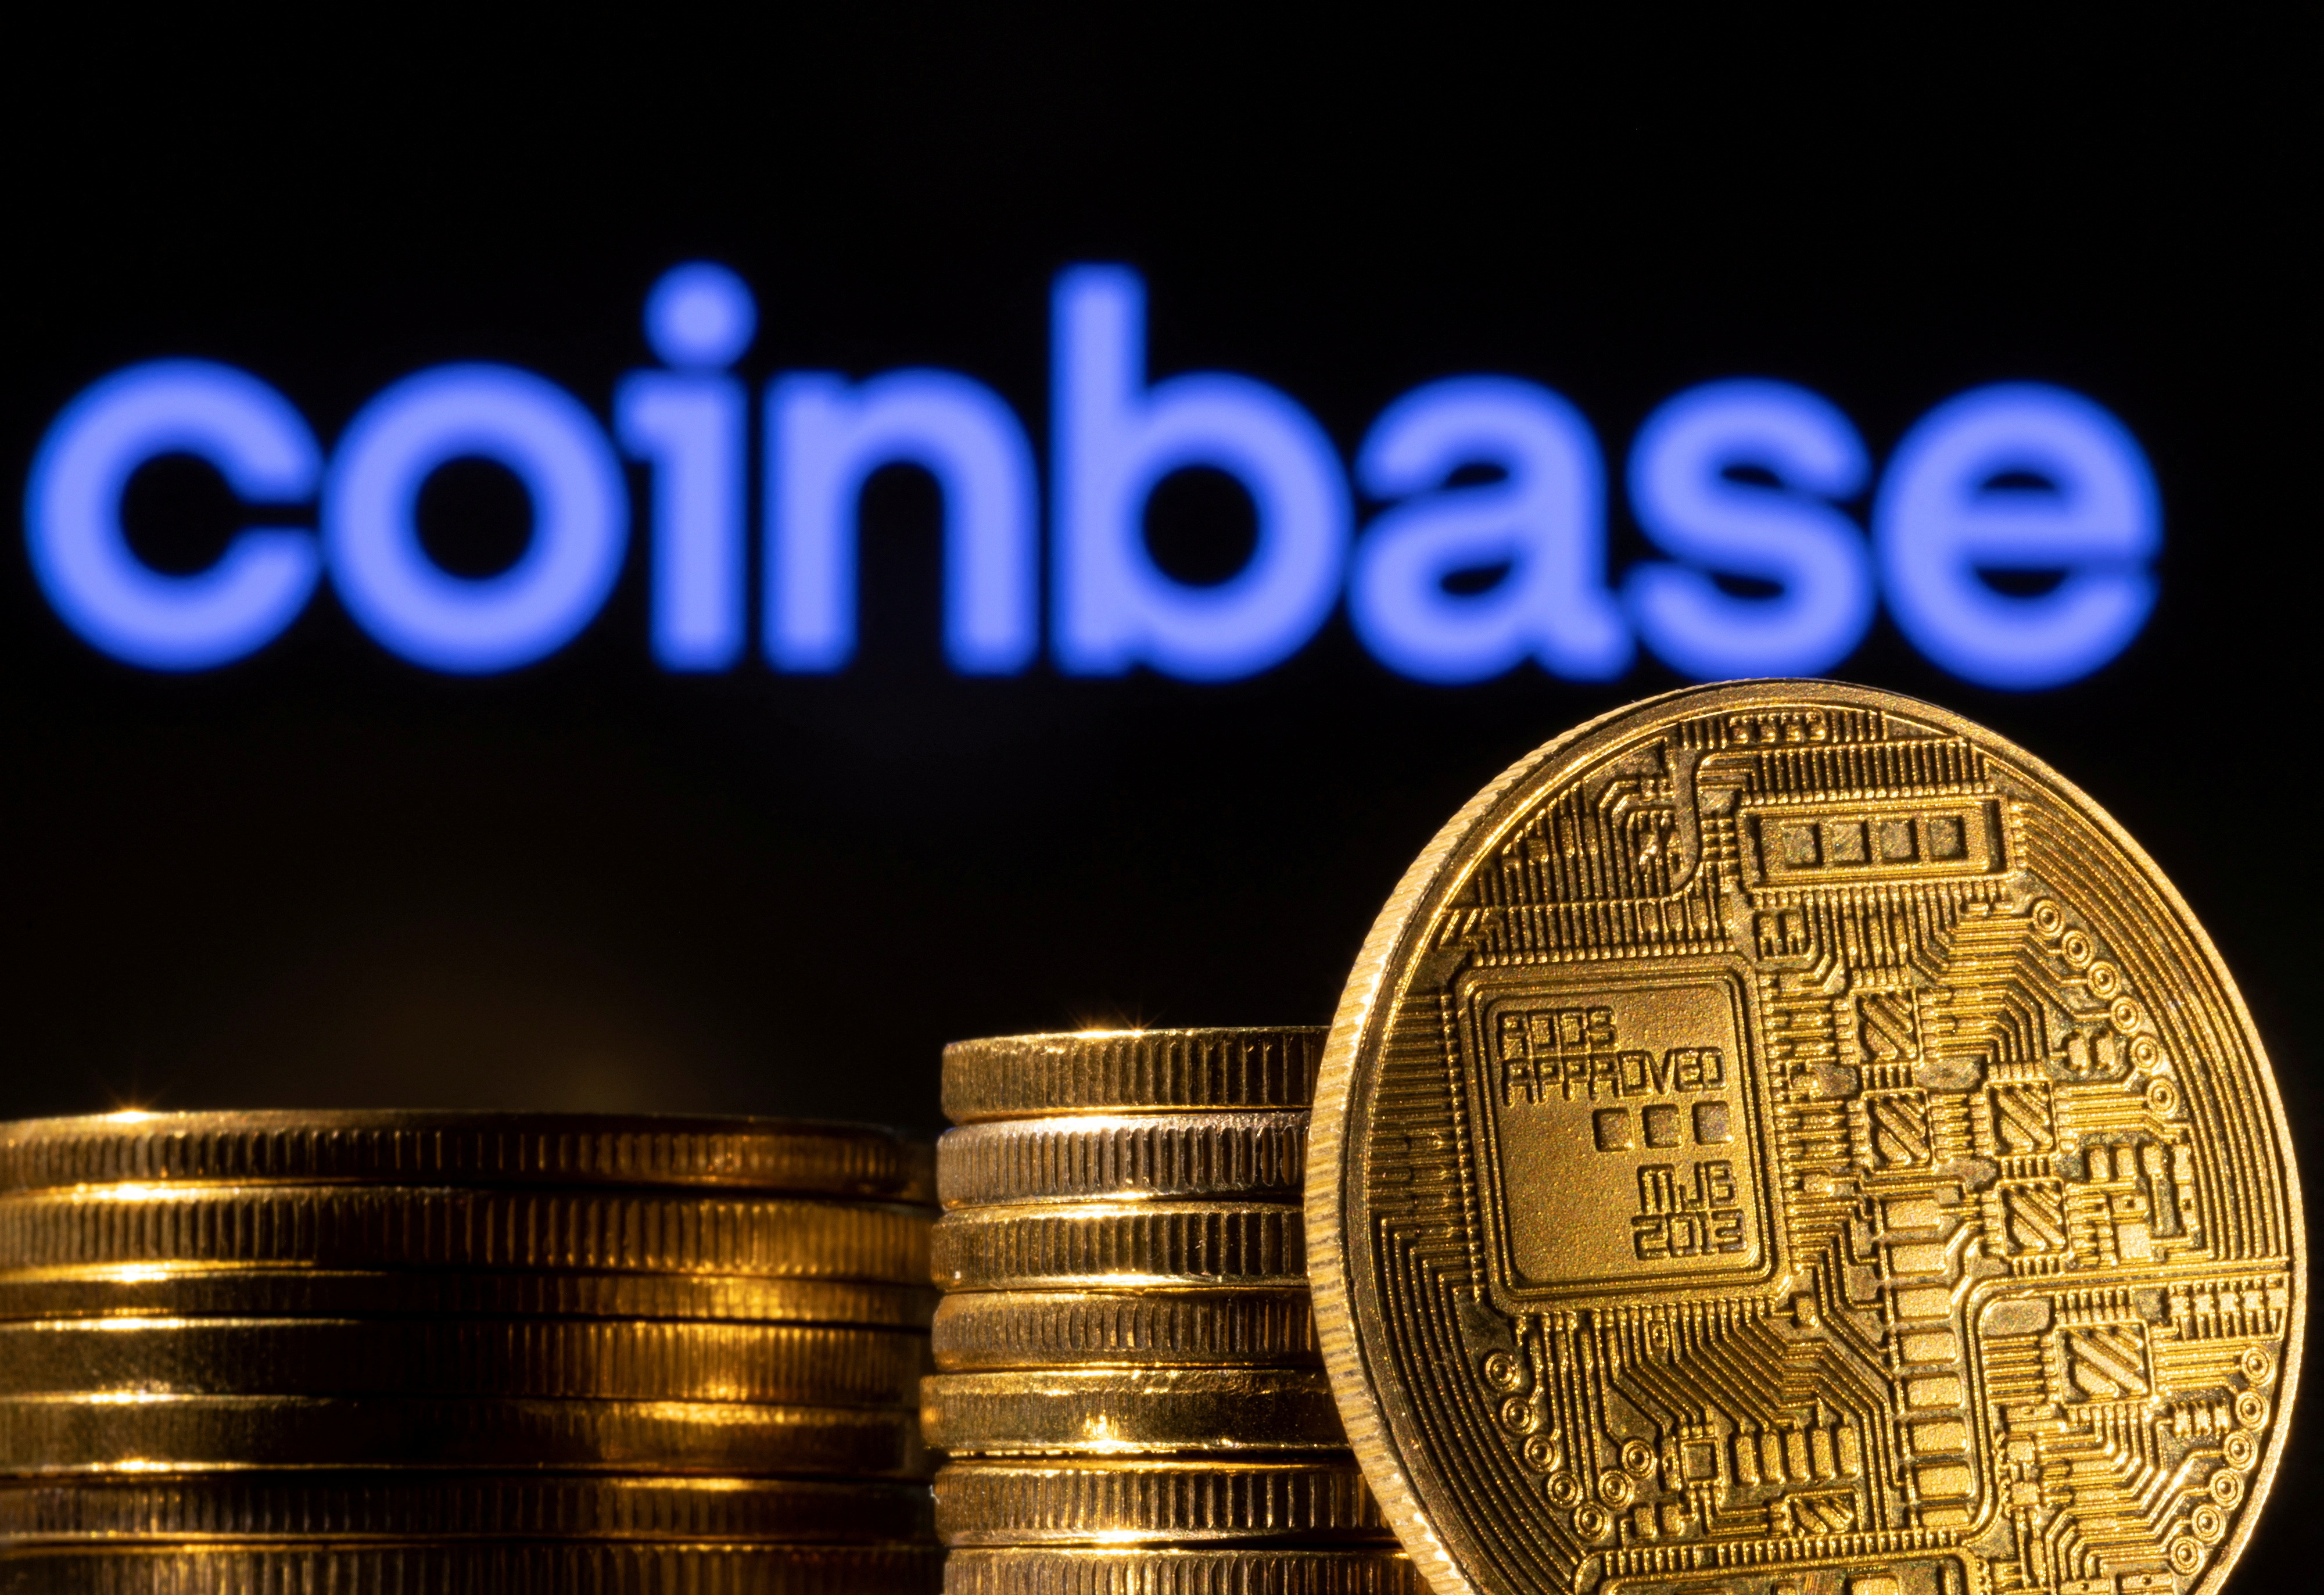 The illustration shows a representation of Cryptocurrency and the Coinbase logo